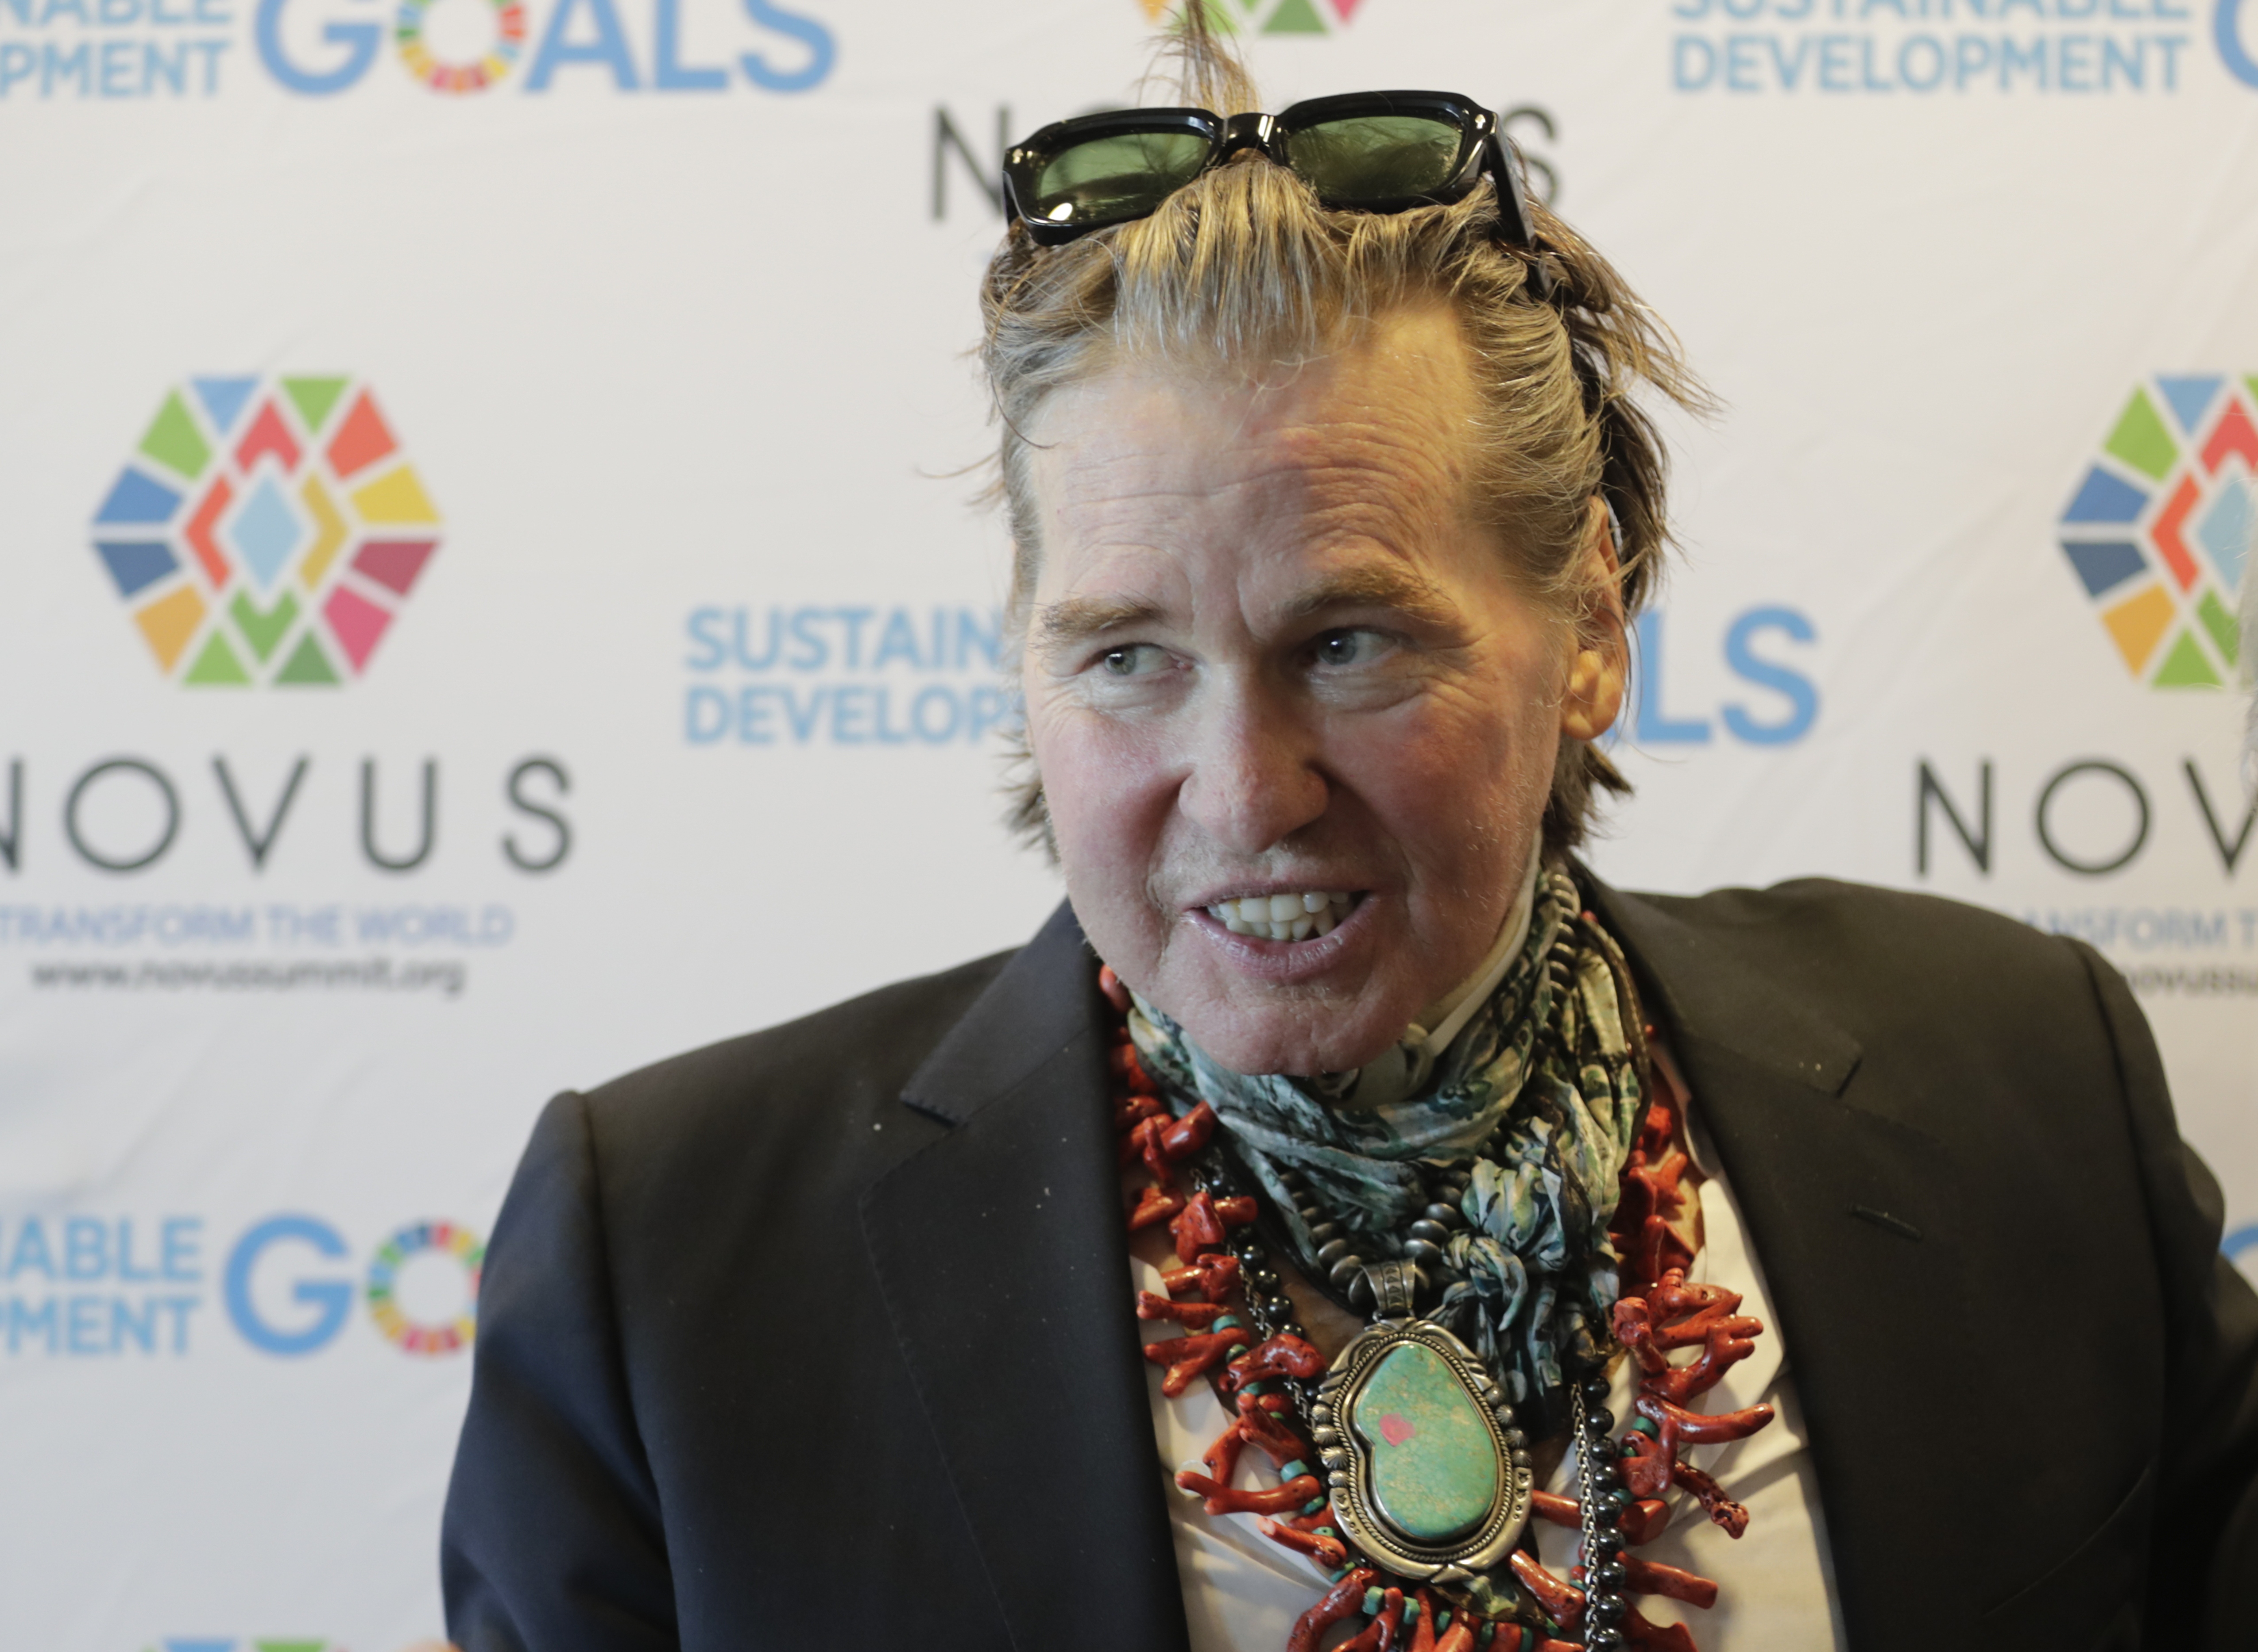 Val Kilmer at the United Nations headquarters in New York City to promote the 17 Sustainable Development Goals (SDGs) initiative, July 20, 2019 | Source: Getty Images